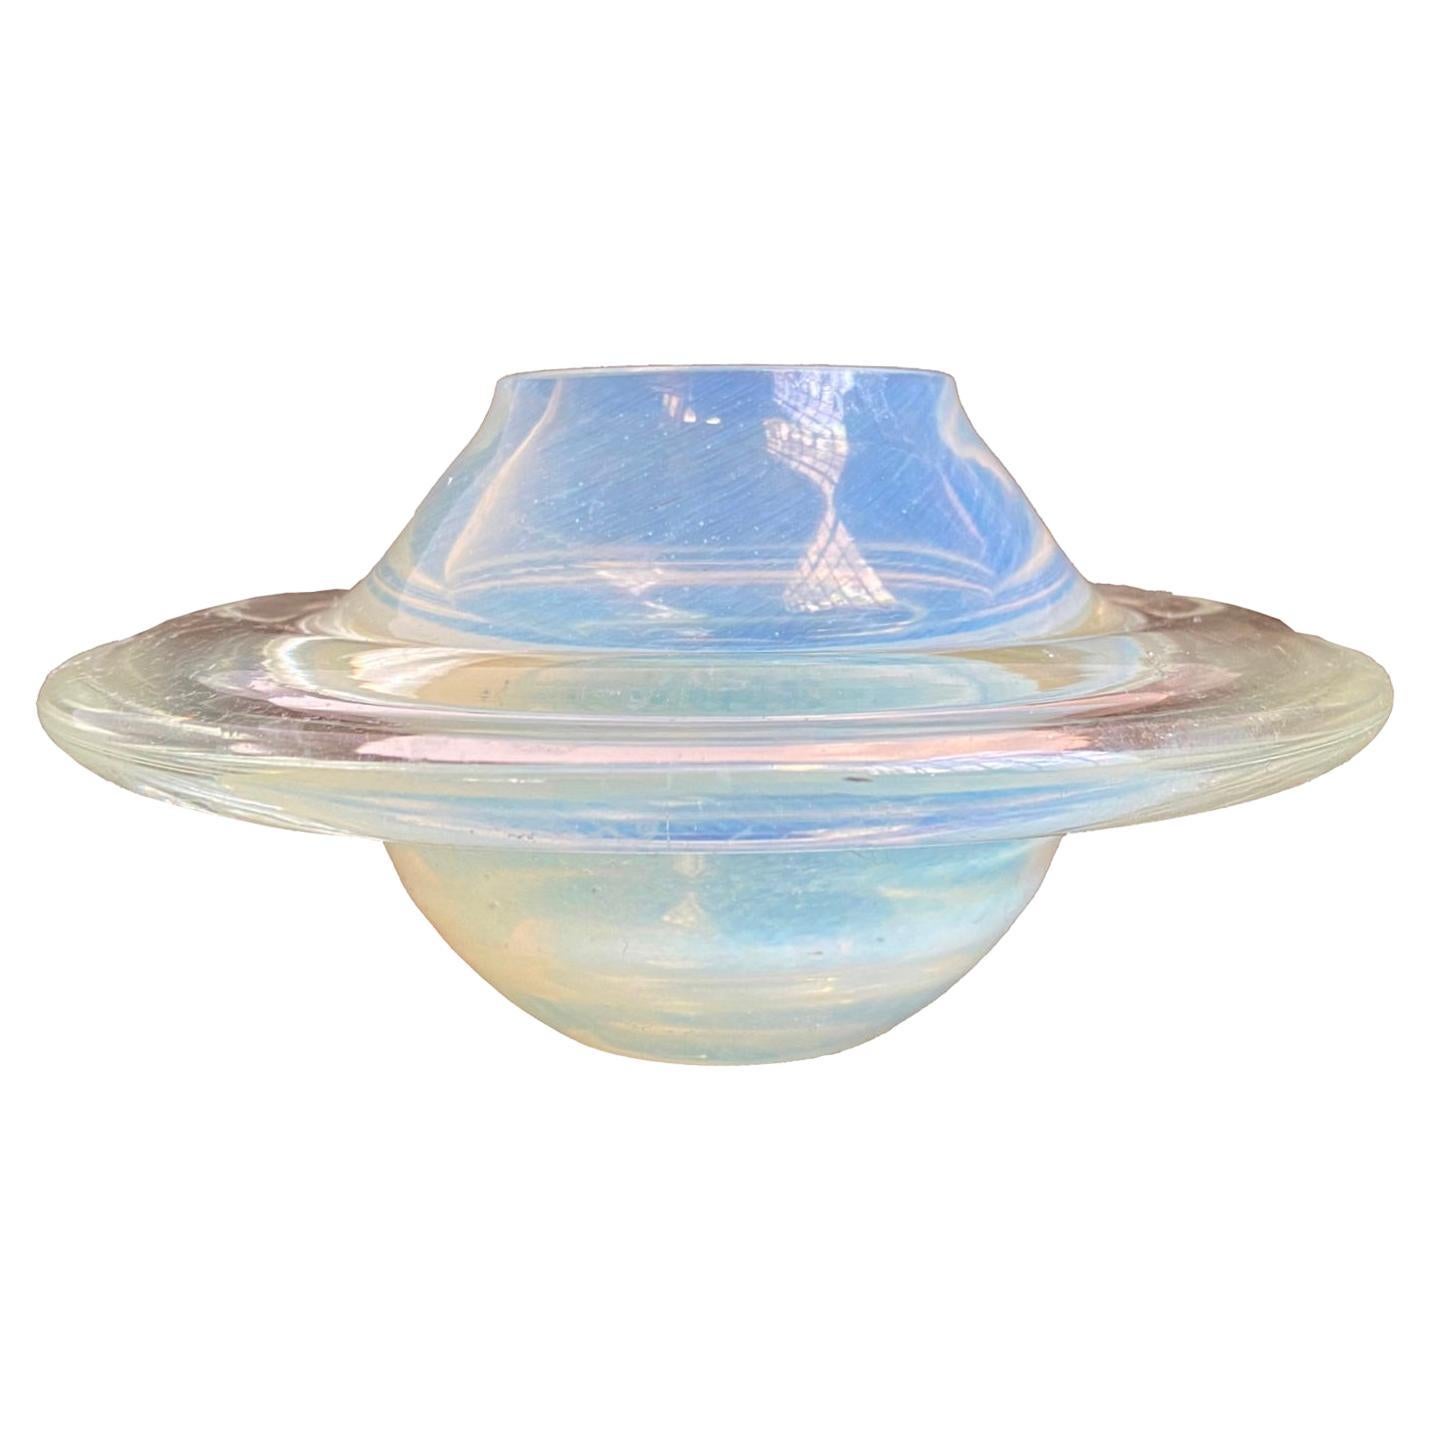 Opalescent Murano Glass Saturn Shaped Planet Paperweight or Bowl, Italy 1960s For Sale